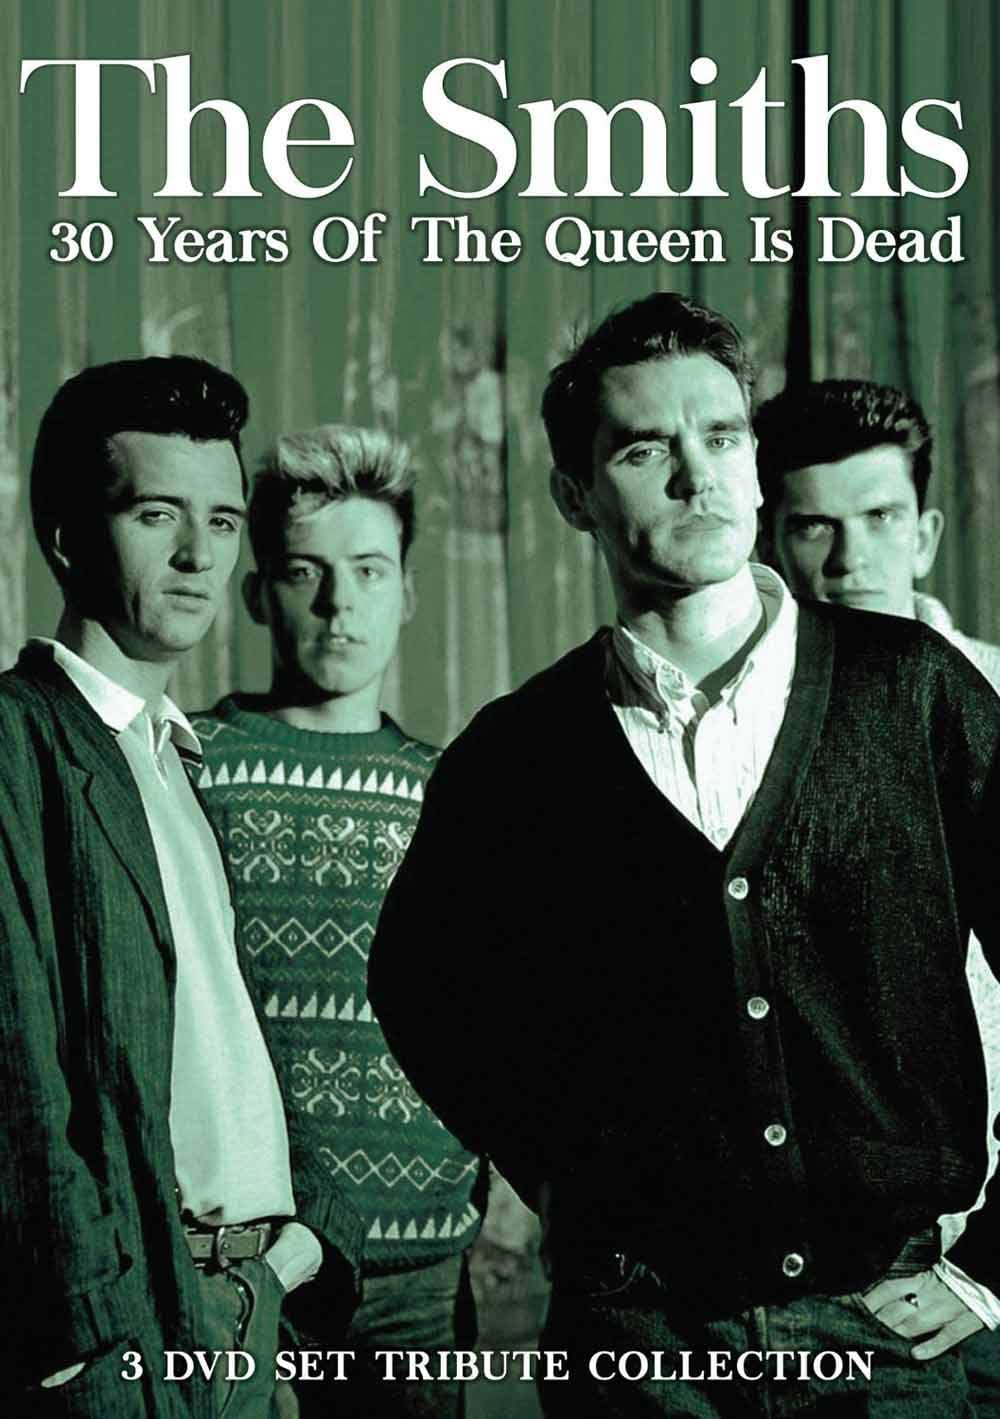 SMITHS - 30 YEARS OF THE QUEEN IS DEAD (1 DVD) - Drama [DVD]